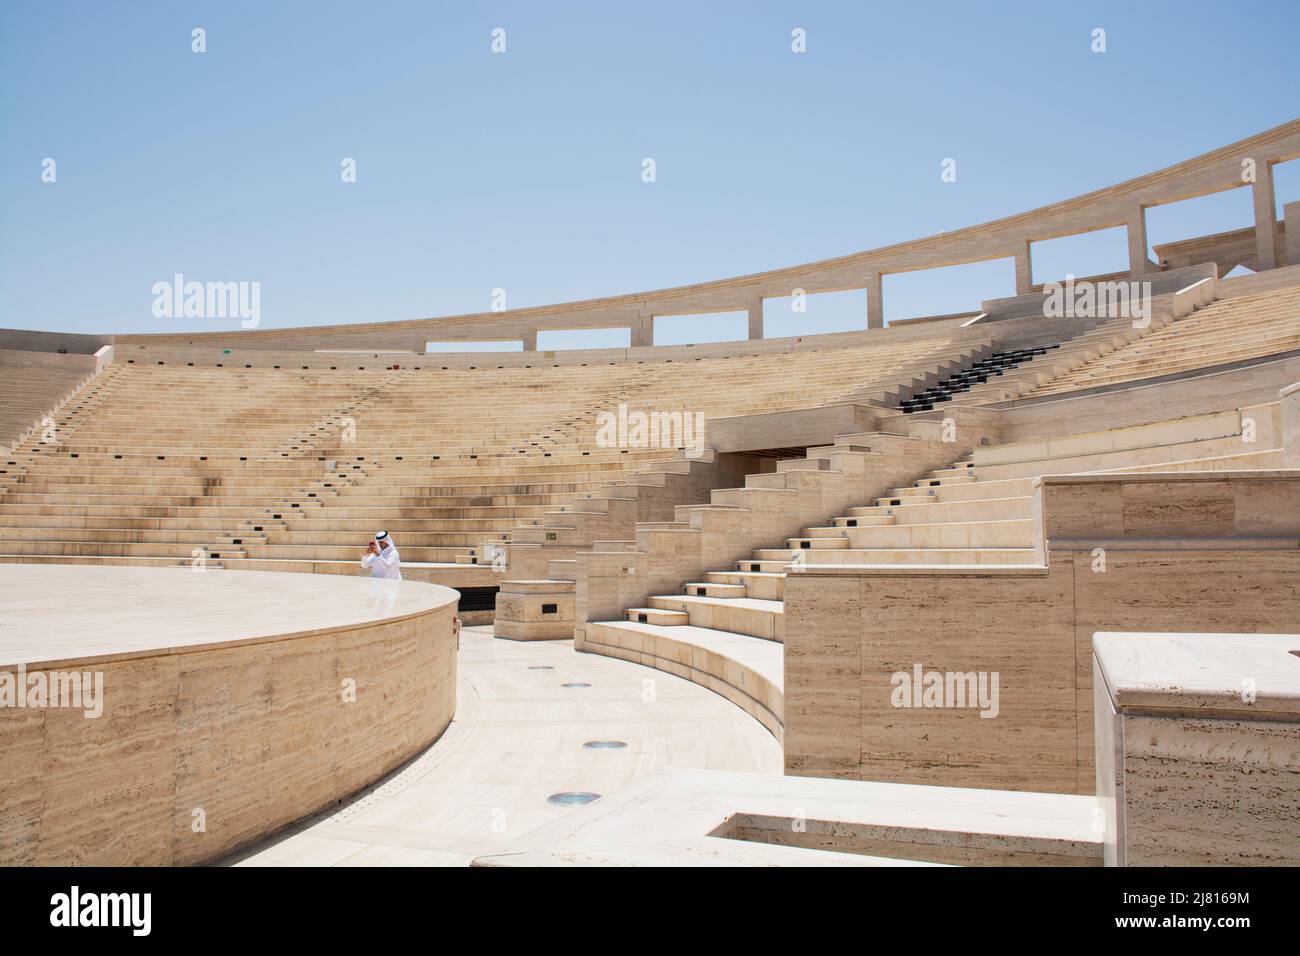 Doha Qatar. 23. April 2017 Amphitheater in cultural village Katara, Doha. Built with traditional Islamic features and classical Greek influences, Stock Photo